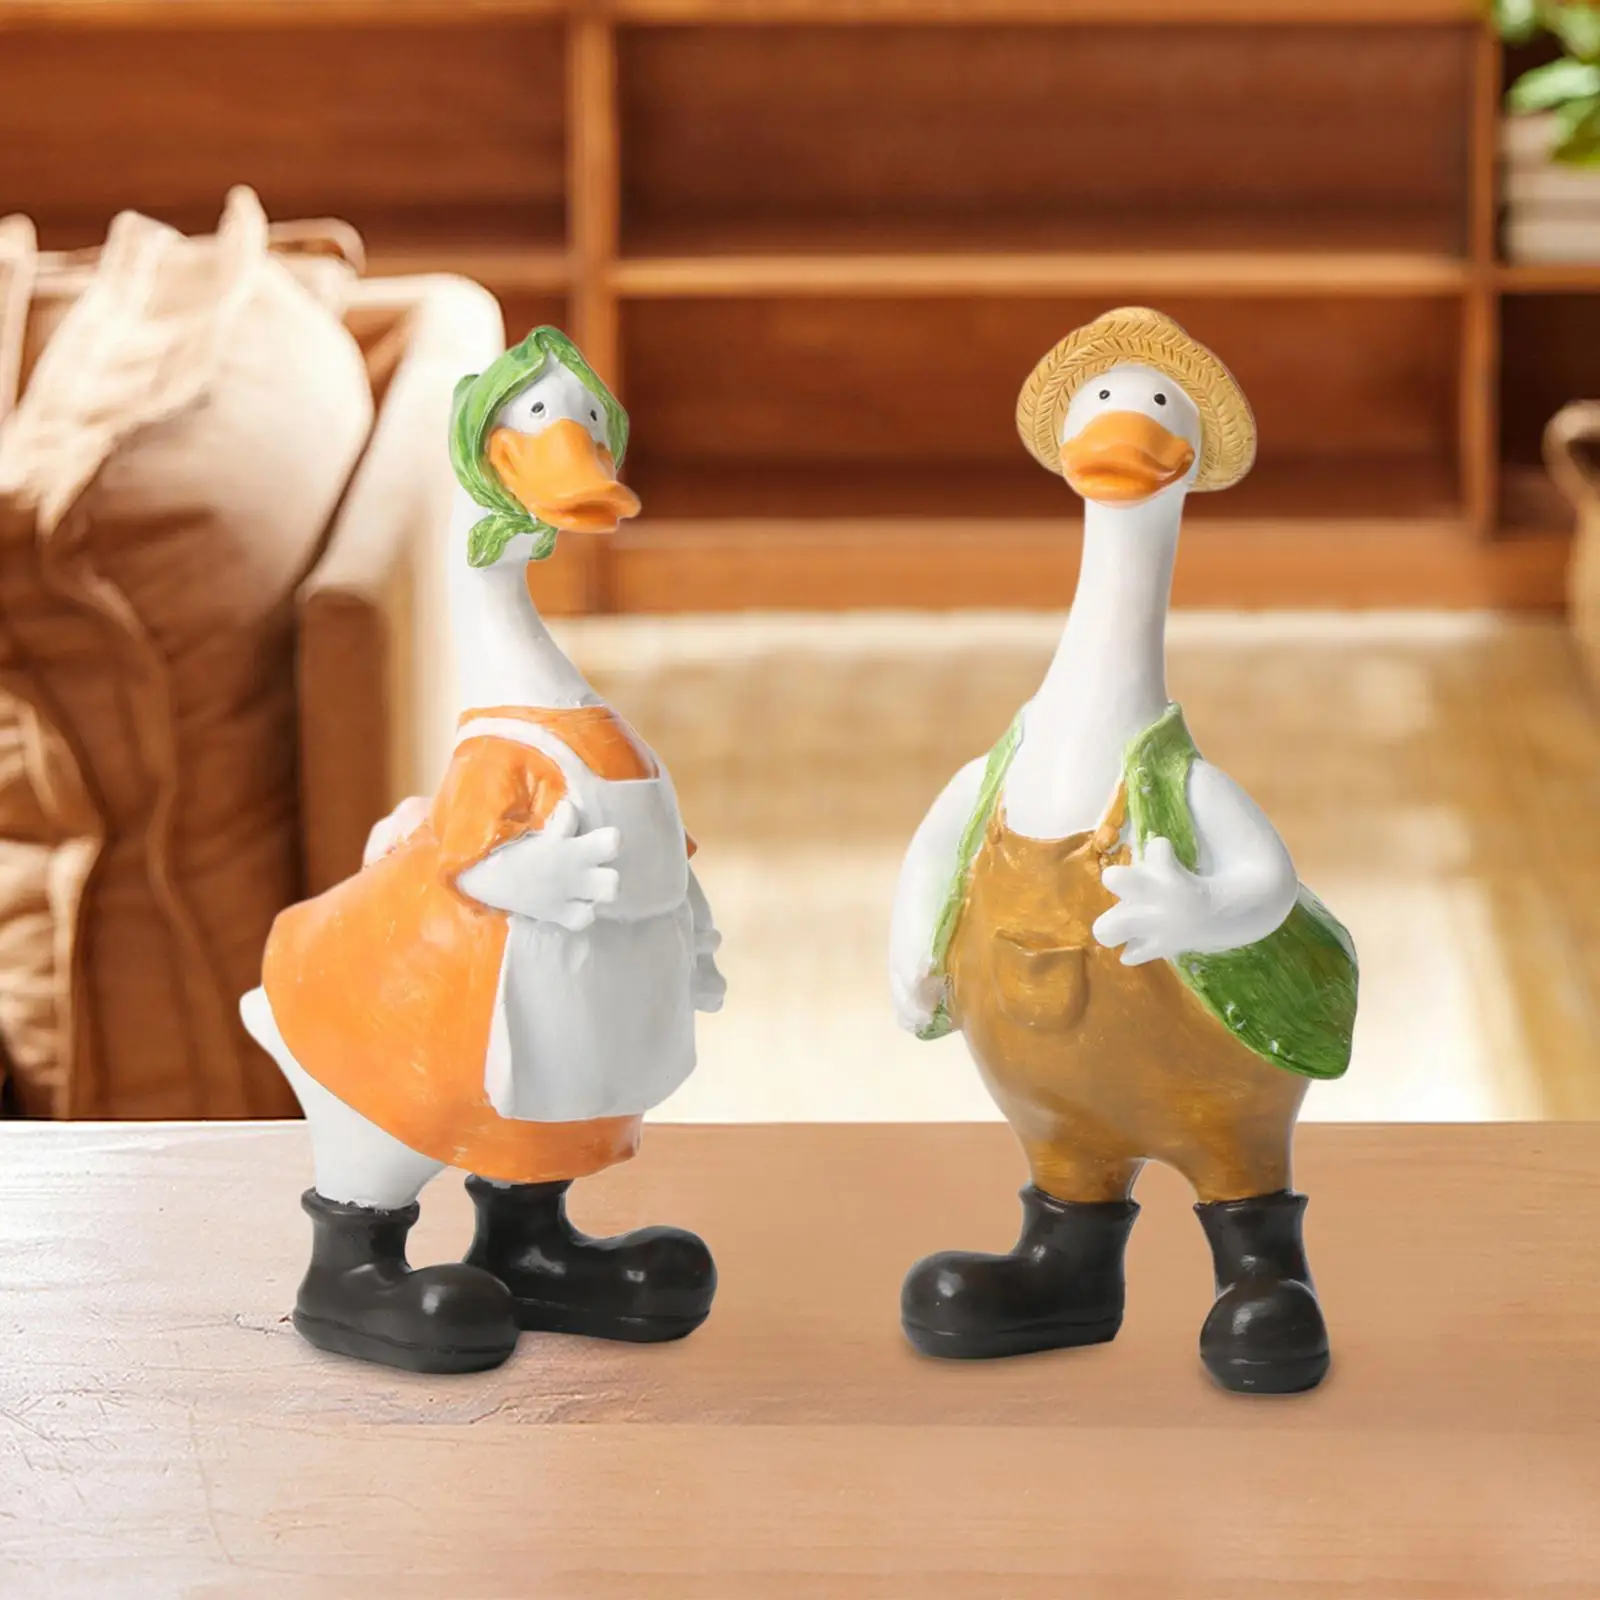 2 Pieces Couple Duck Statues Valentine`s Day Gift Animal Sculpture Duck Figurine for Balcony Table Indoor Outdoor Lawn Shelf